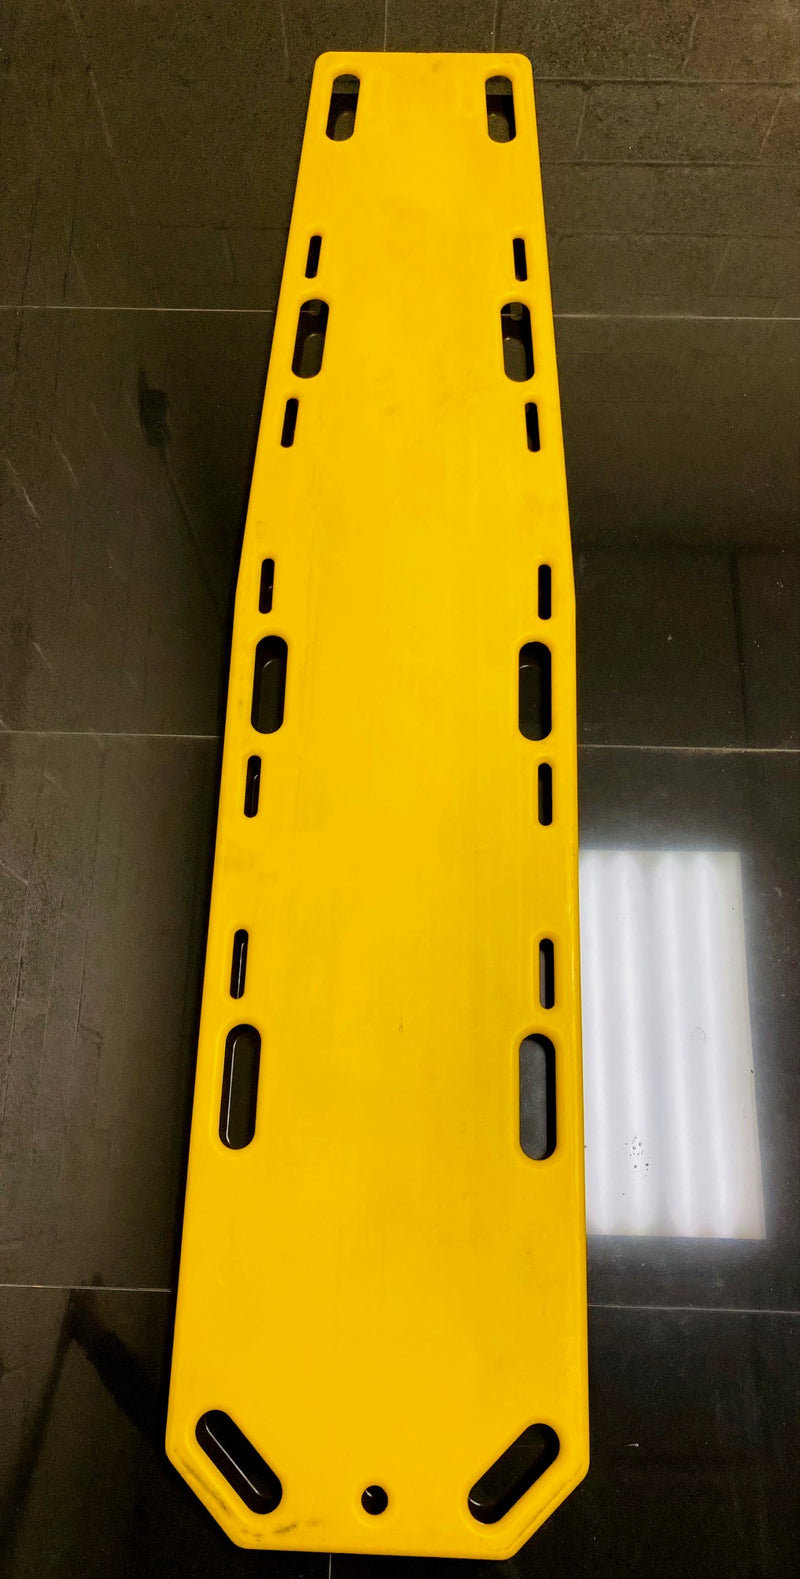 Spine Board - Used Equipment